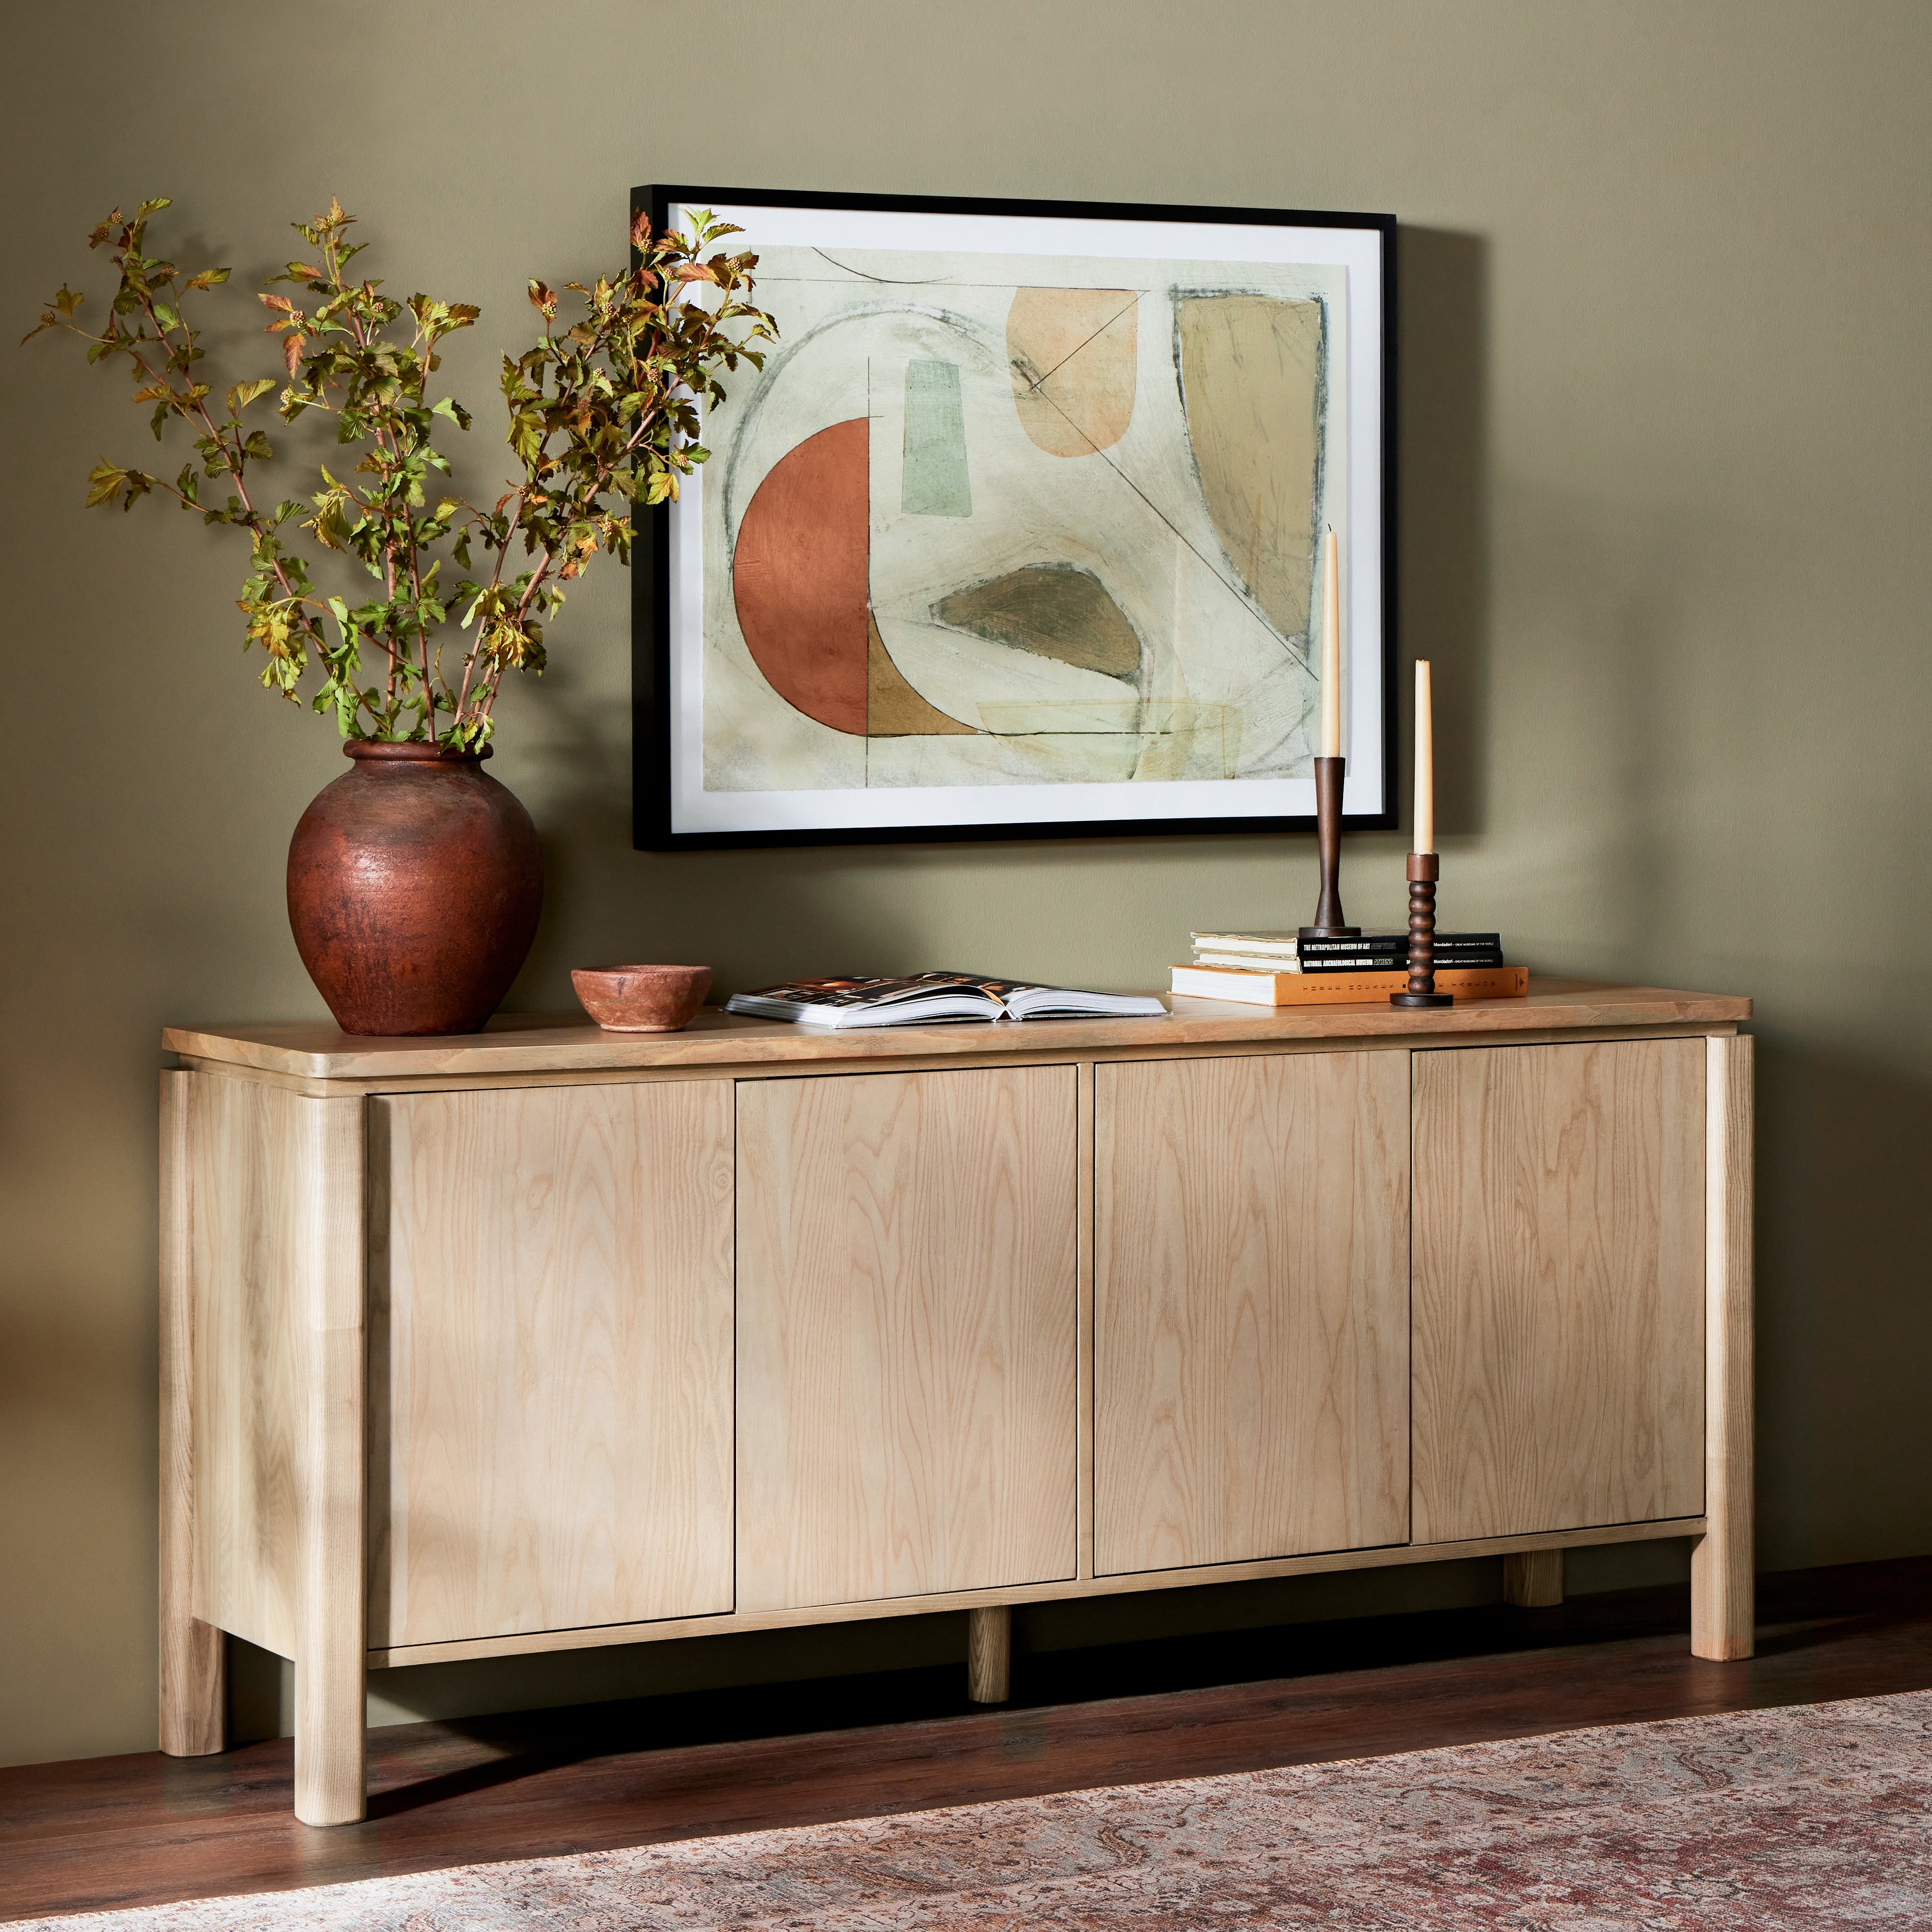 Large, rounded legs support this sleek sideboard with a reveal detail at the top. A beautiful ash finish showcases and highlights the natural wood grain. Amethyst Home provides interior design, new construction, custom furniture, and area rugs in the Omaha metro area.